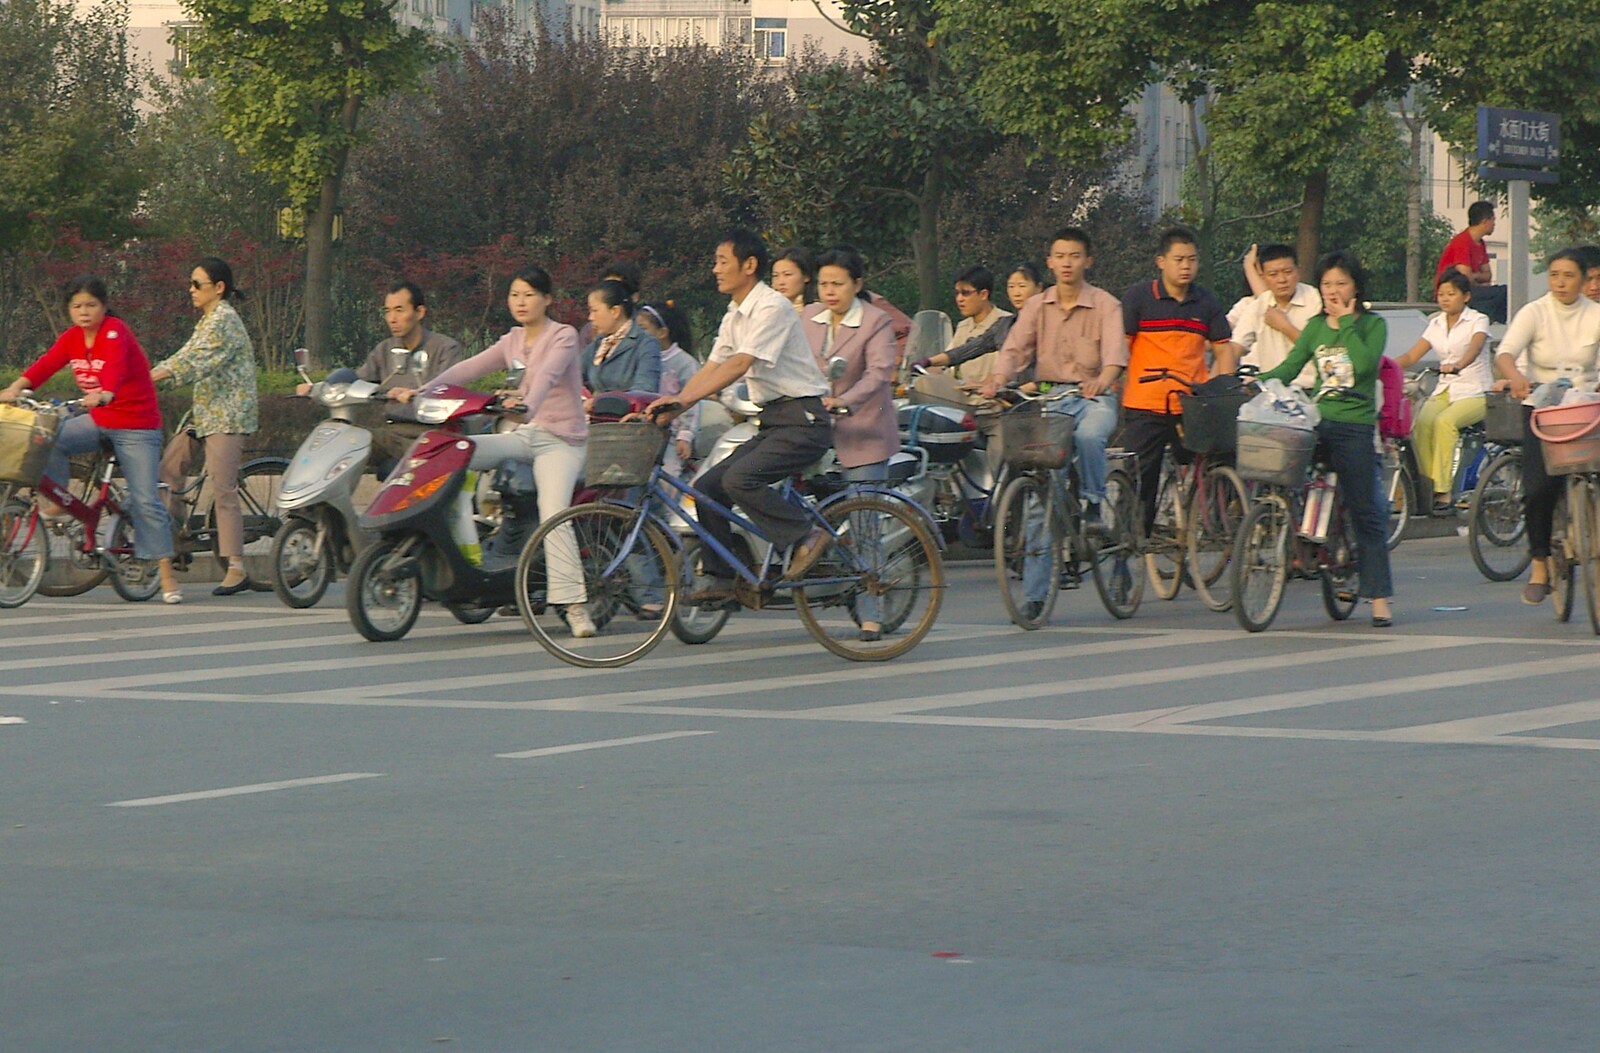 More bicycles are seen on the way to the airport from A Few Days in Nanjing, Jiangsu Province, China - 7th October 2006